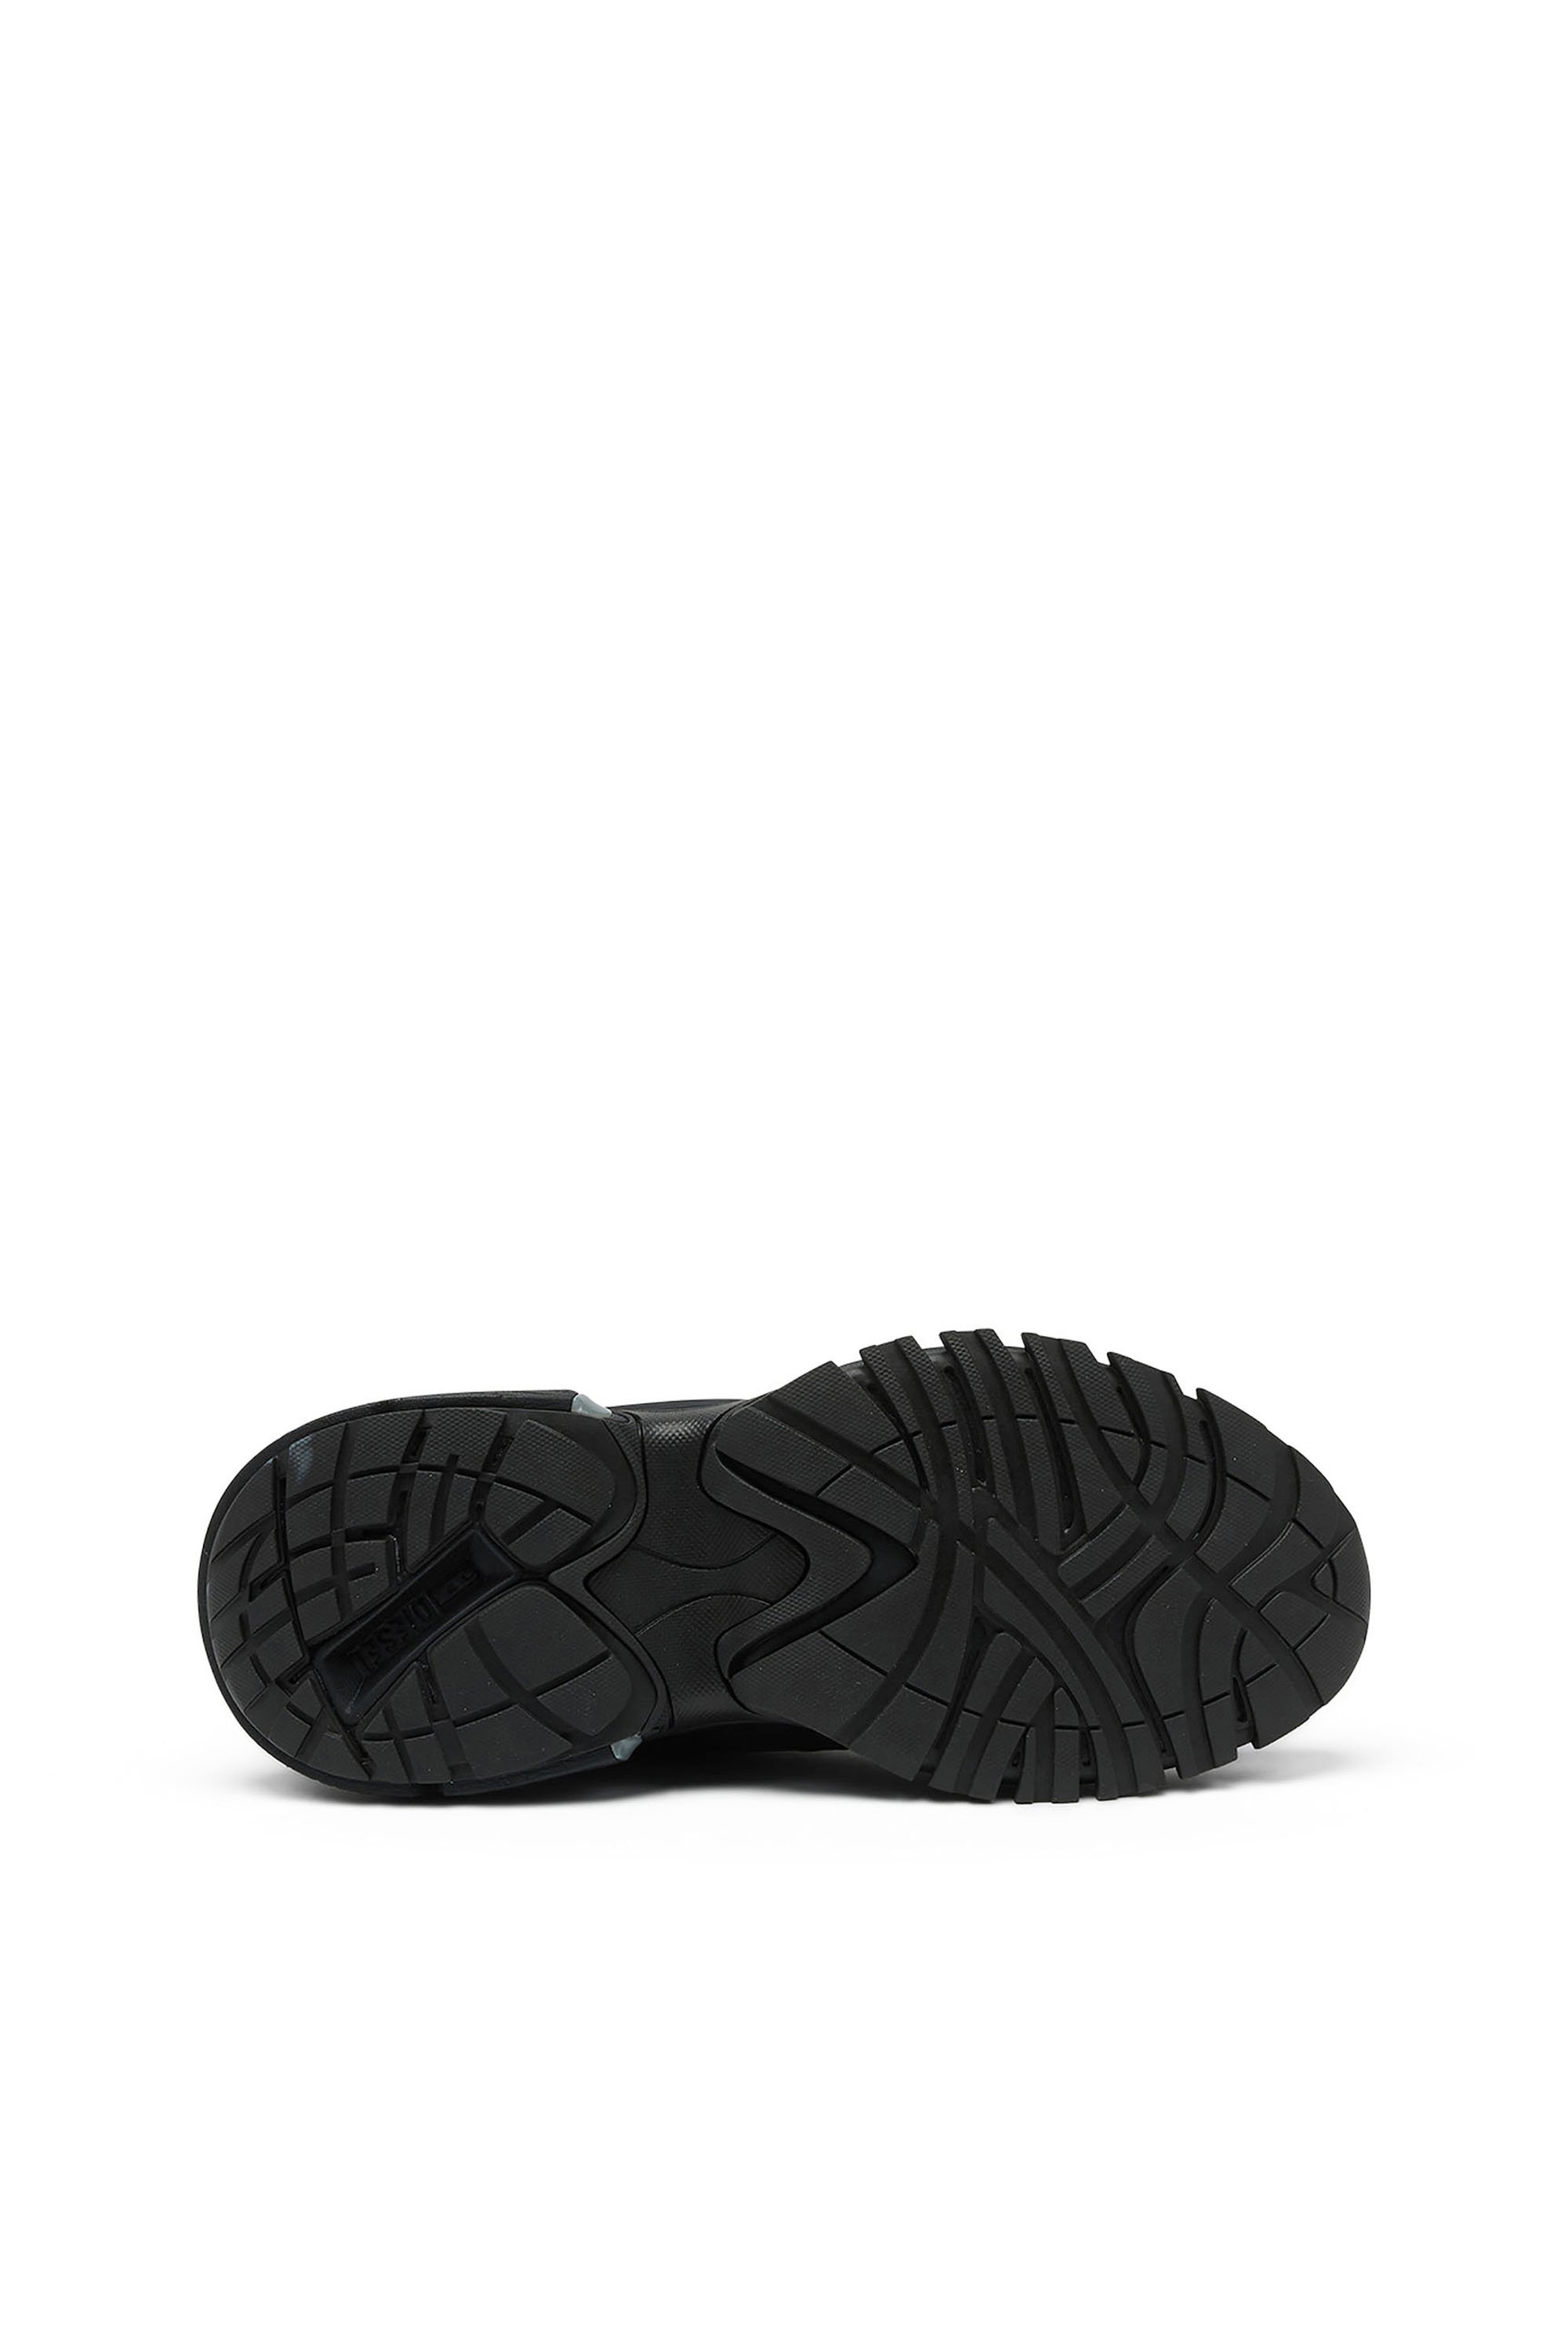 Diesel - S-SERENDIPITY PRO-X1, Man S-Serendipity-Monochrome sneakers in mesh and PU in Black - Image 4